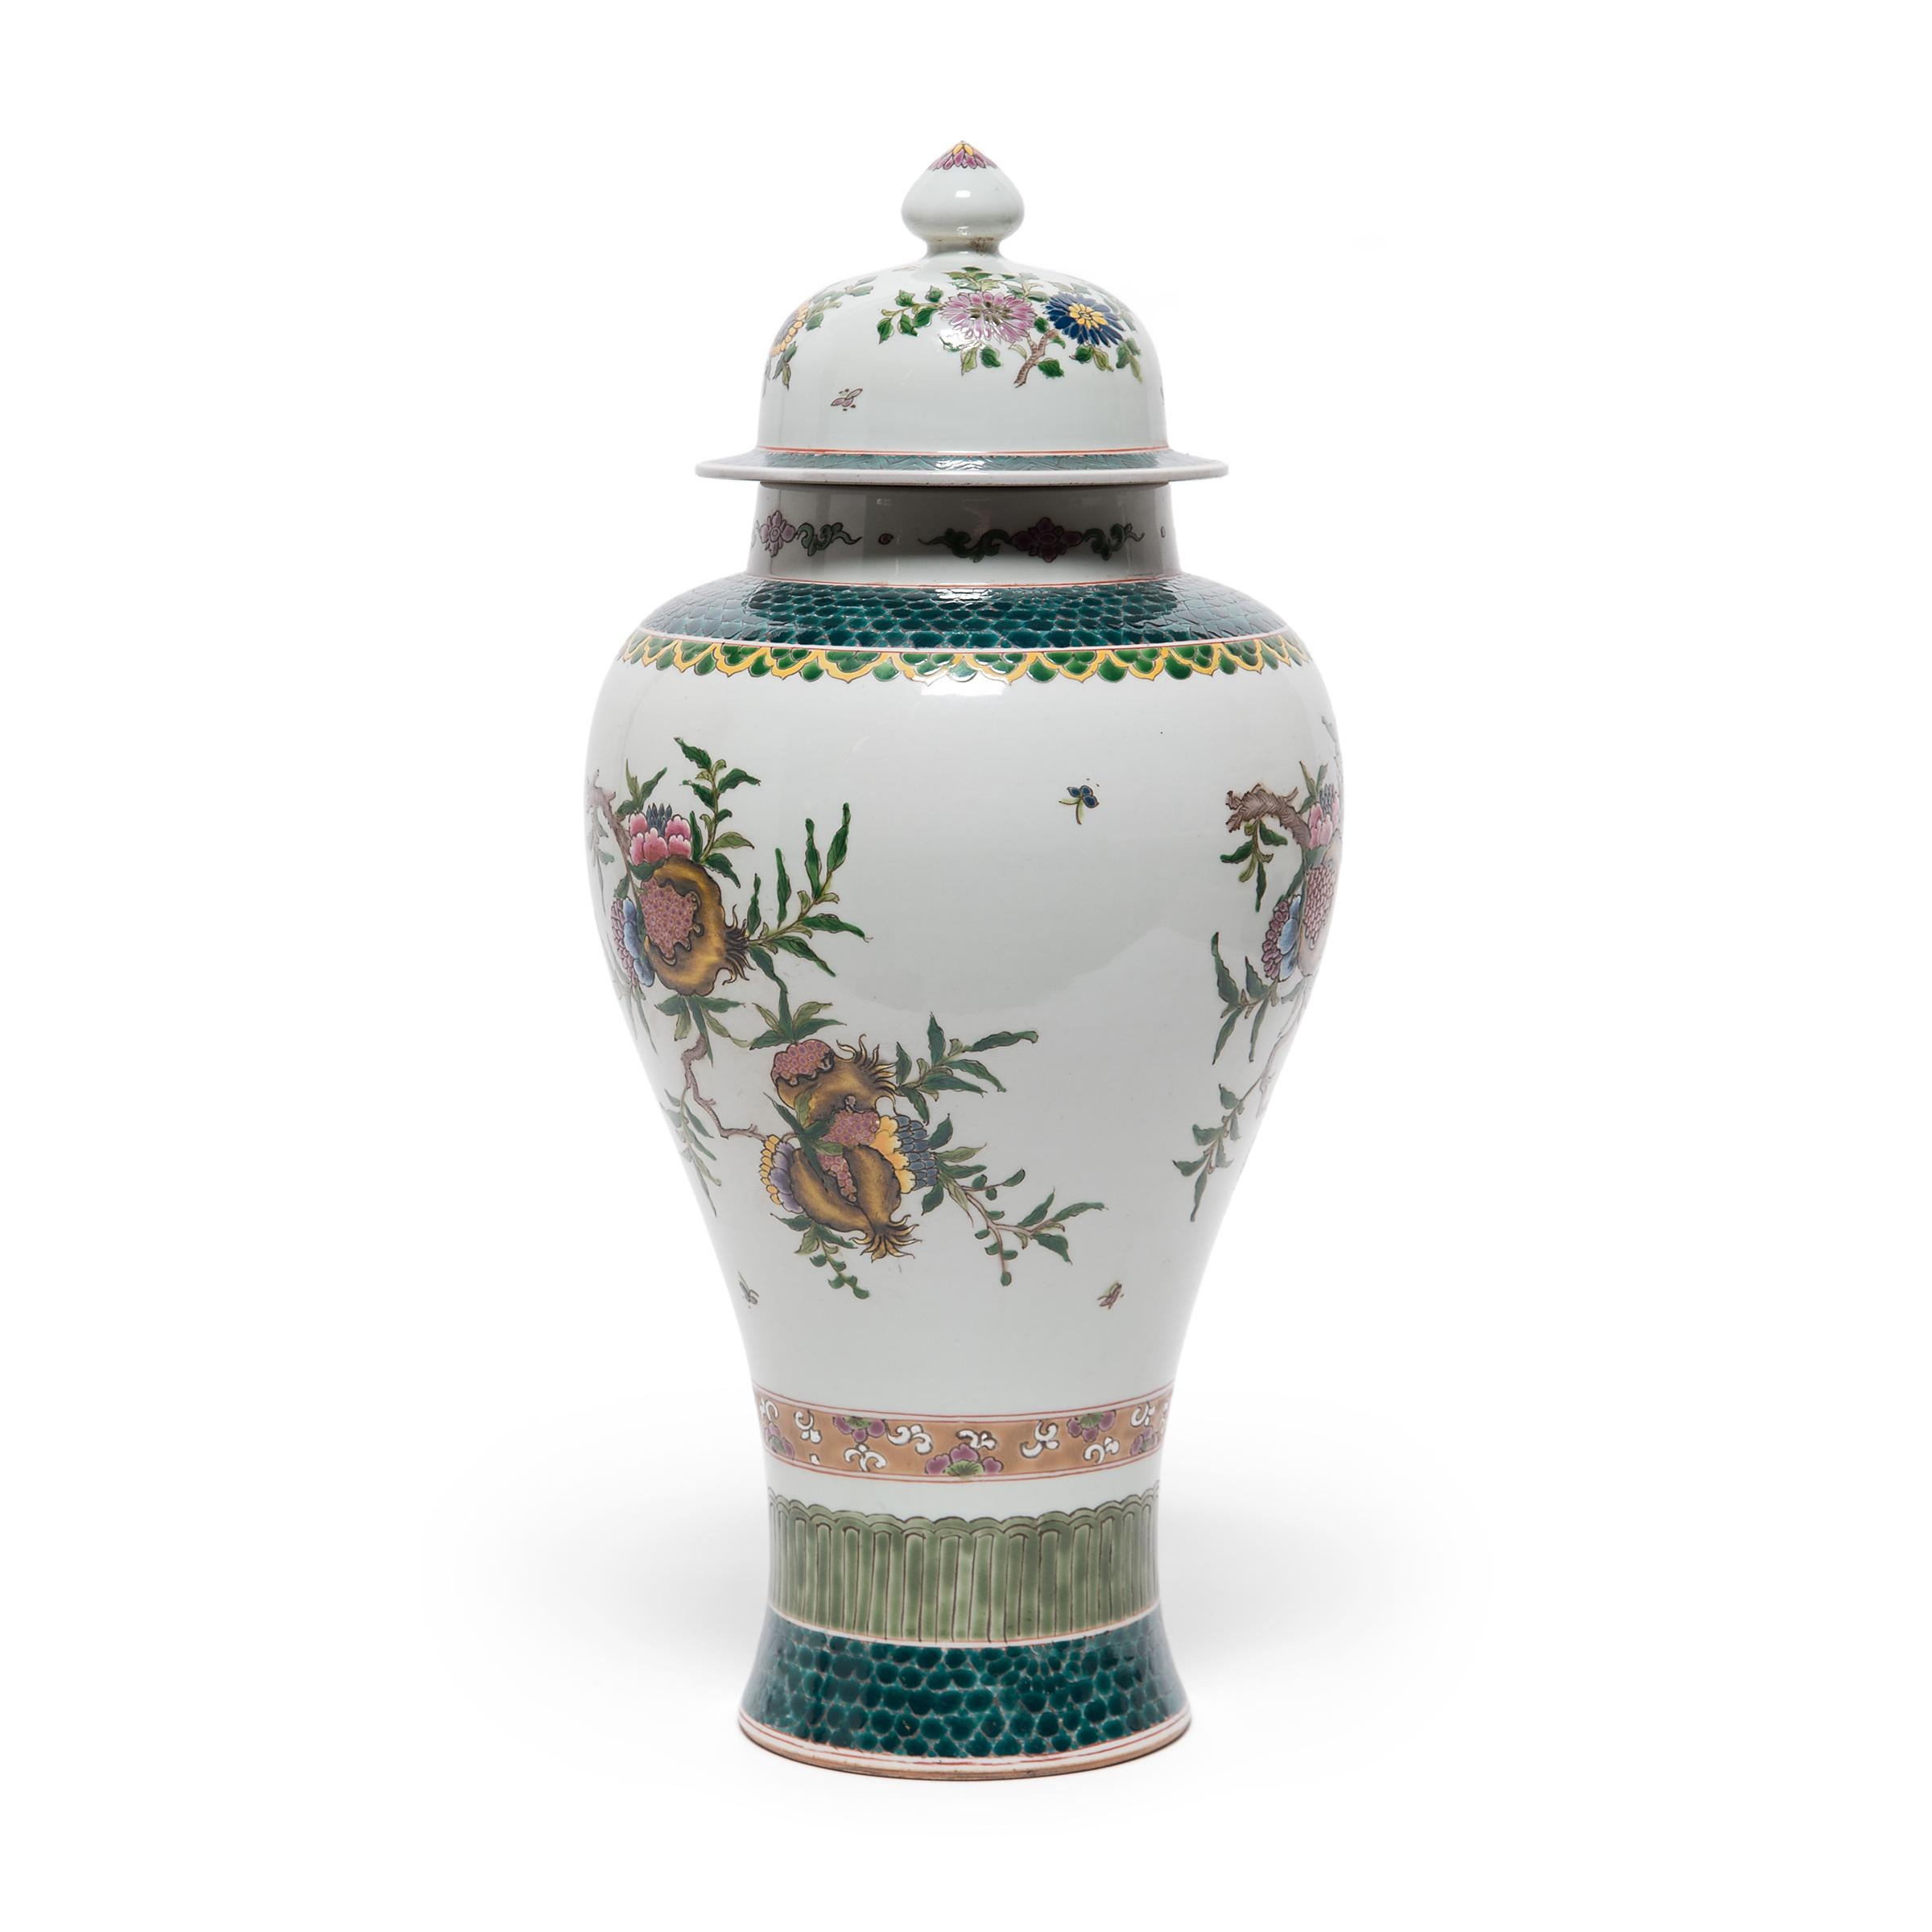 Enameled Pair of Chinese Famille Verte Baluster Jars with Pomegranates, c. 1900